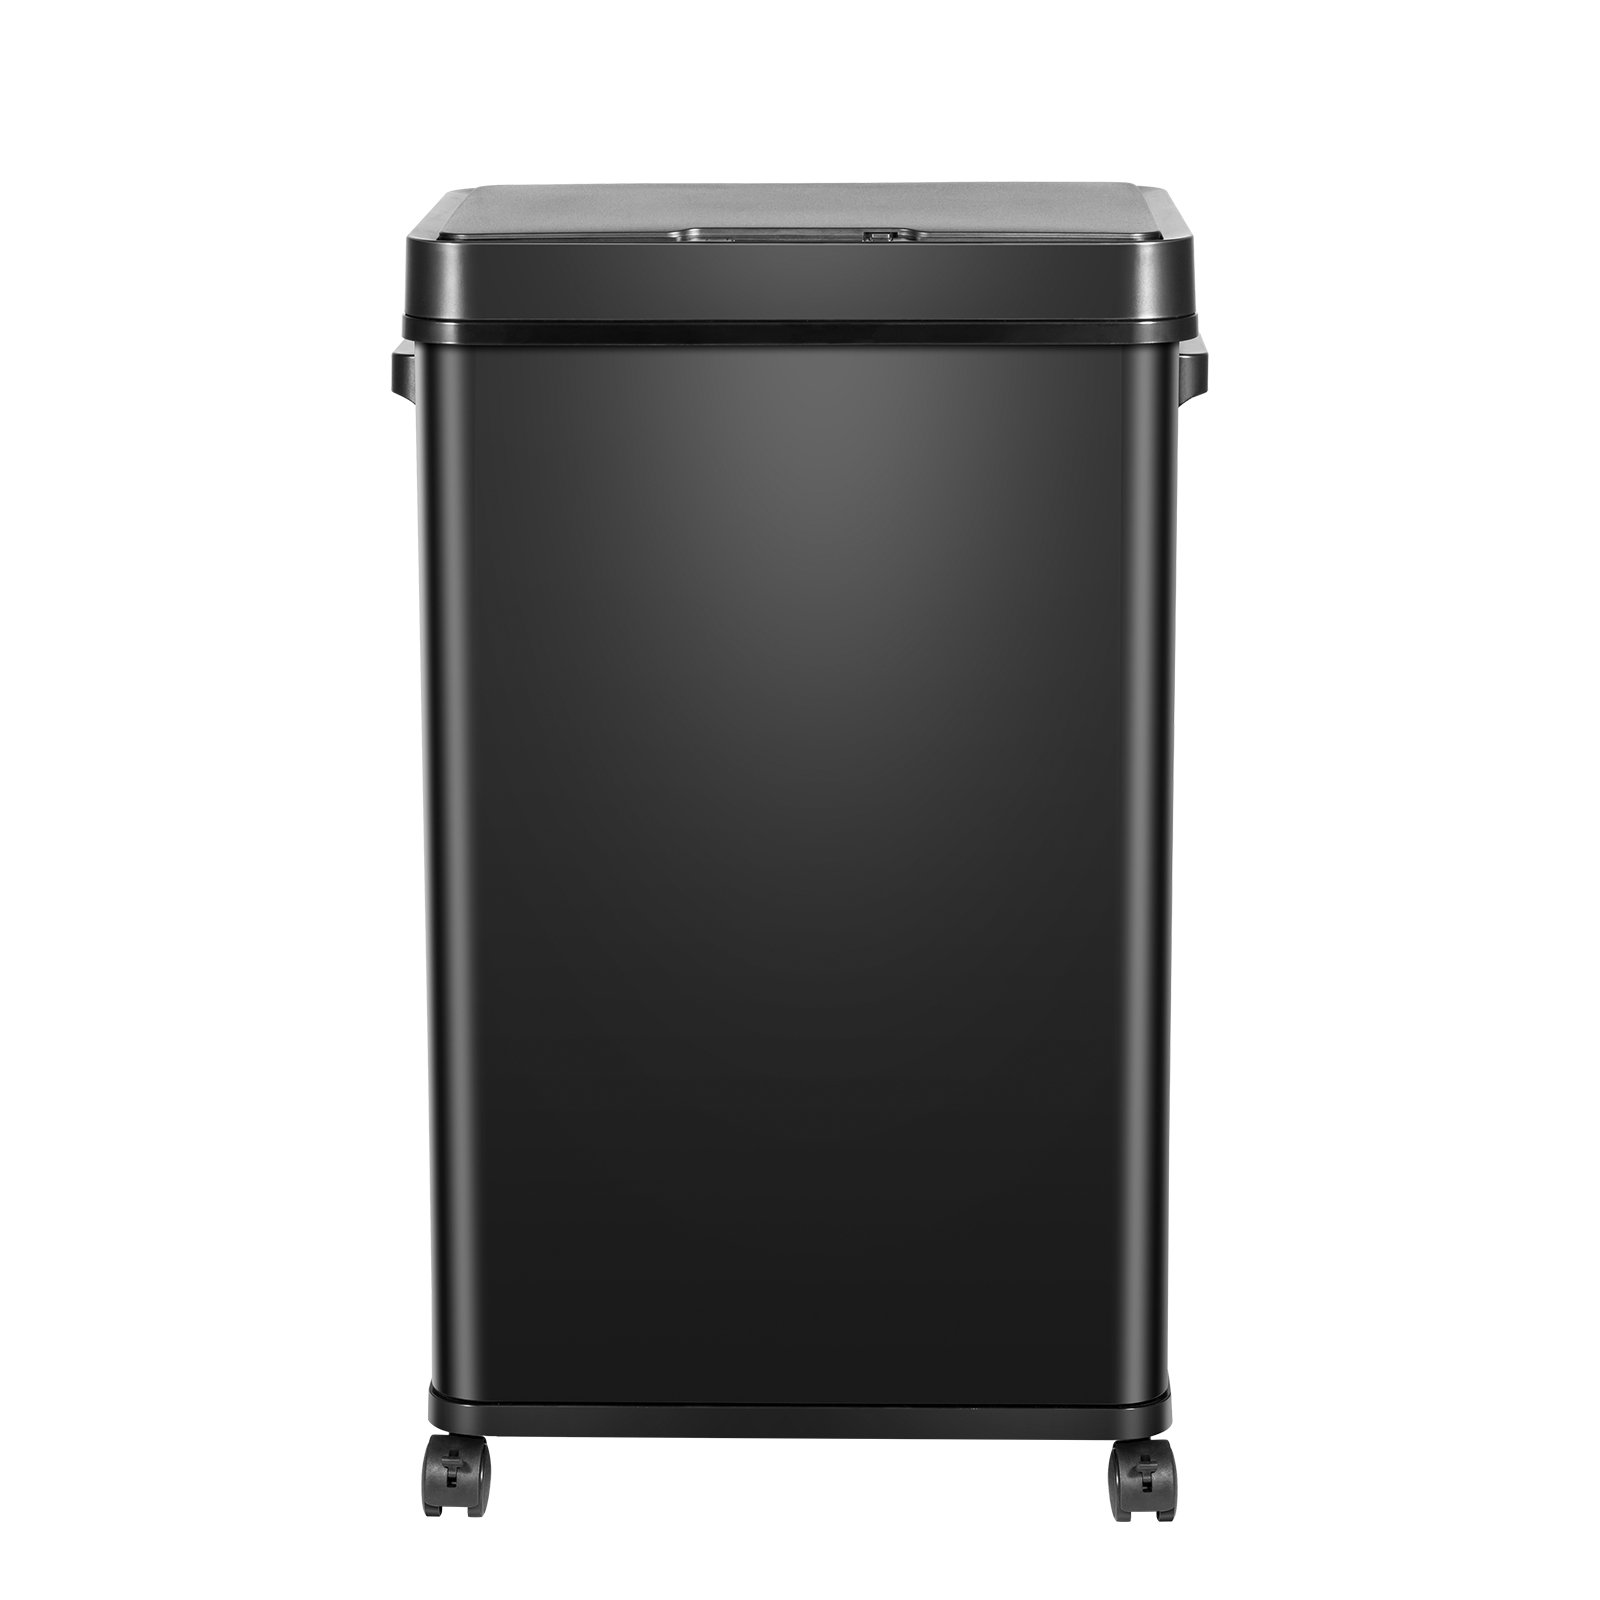 CozyBlock 13 Gallon Automatic Trash Can for Kitchen, Stainless